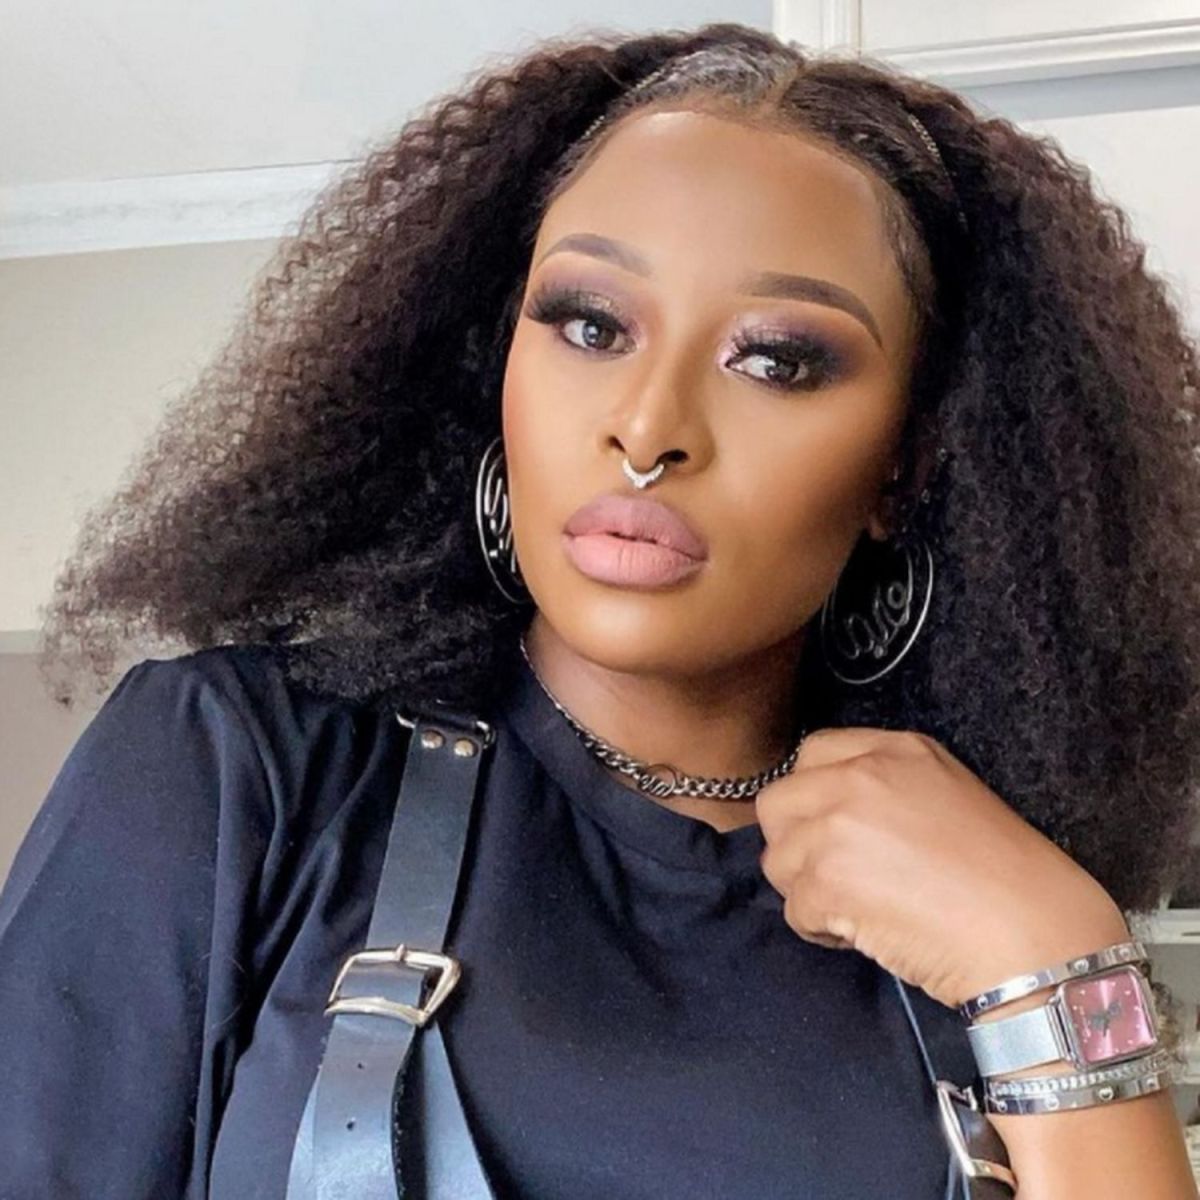 Dj Zinhle Reacts To Backlash Over Not Knowing How To Cook 3